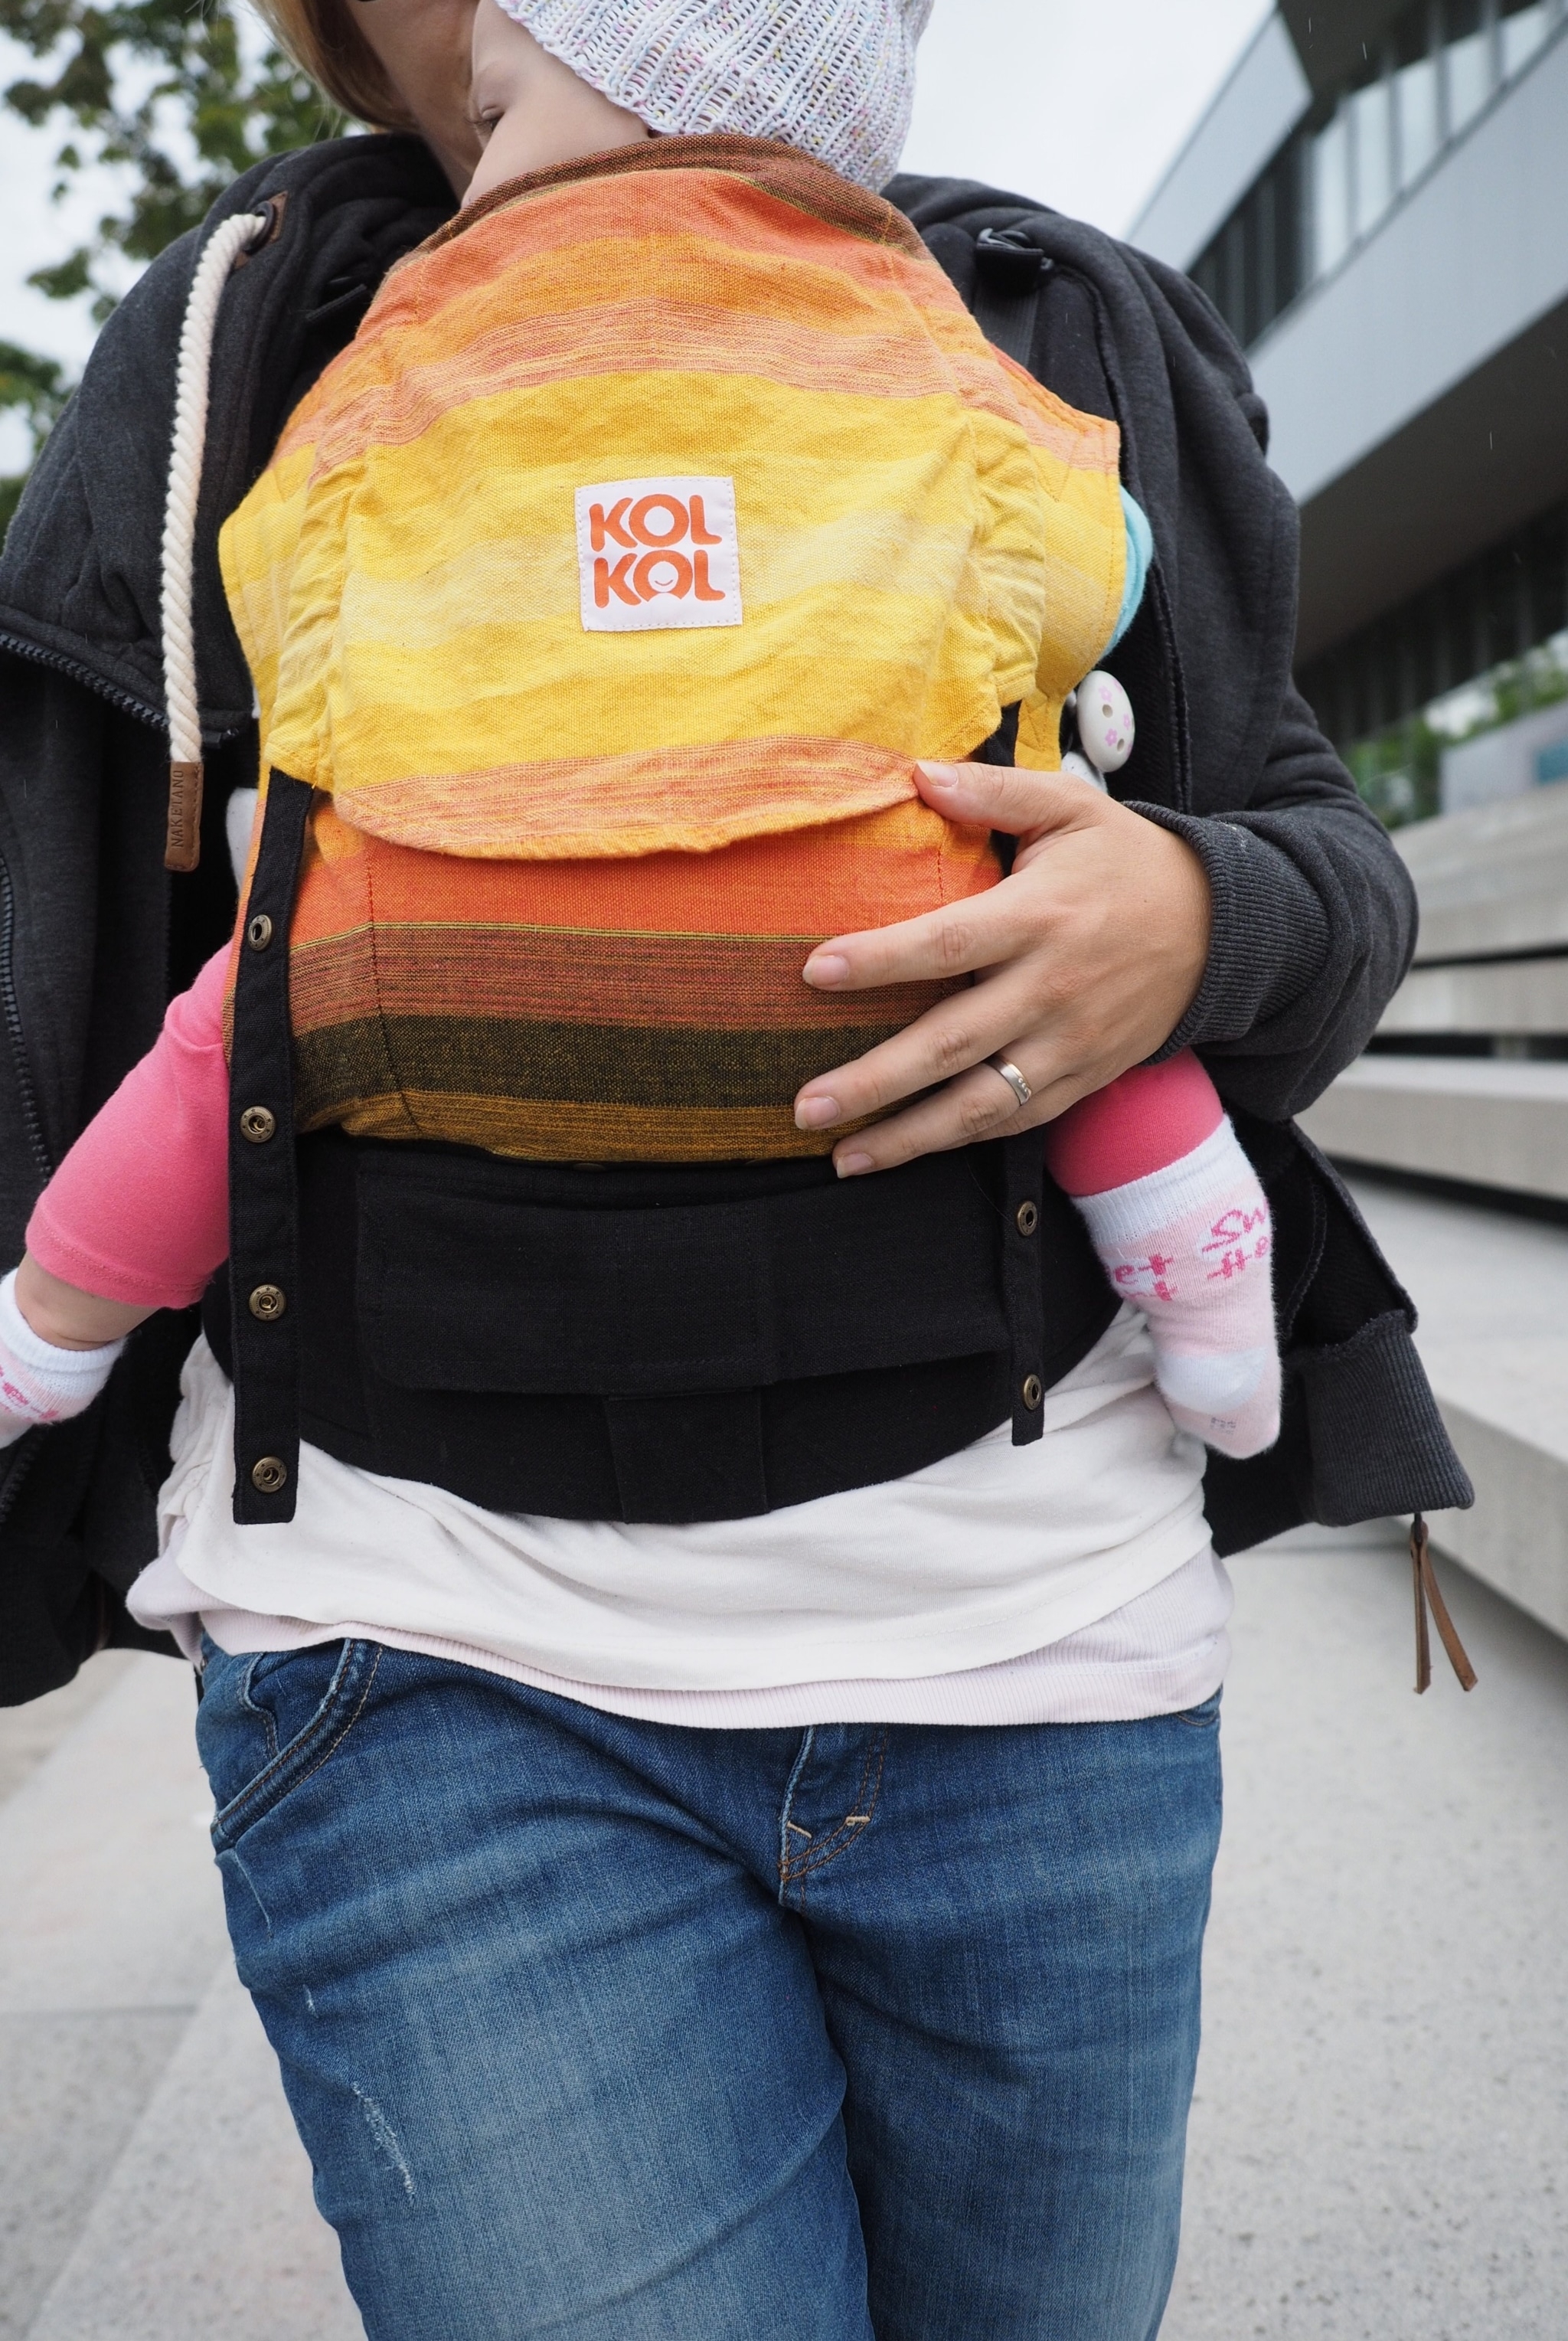 Soft and thin: Kol Kol baby carrier